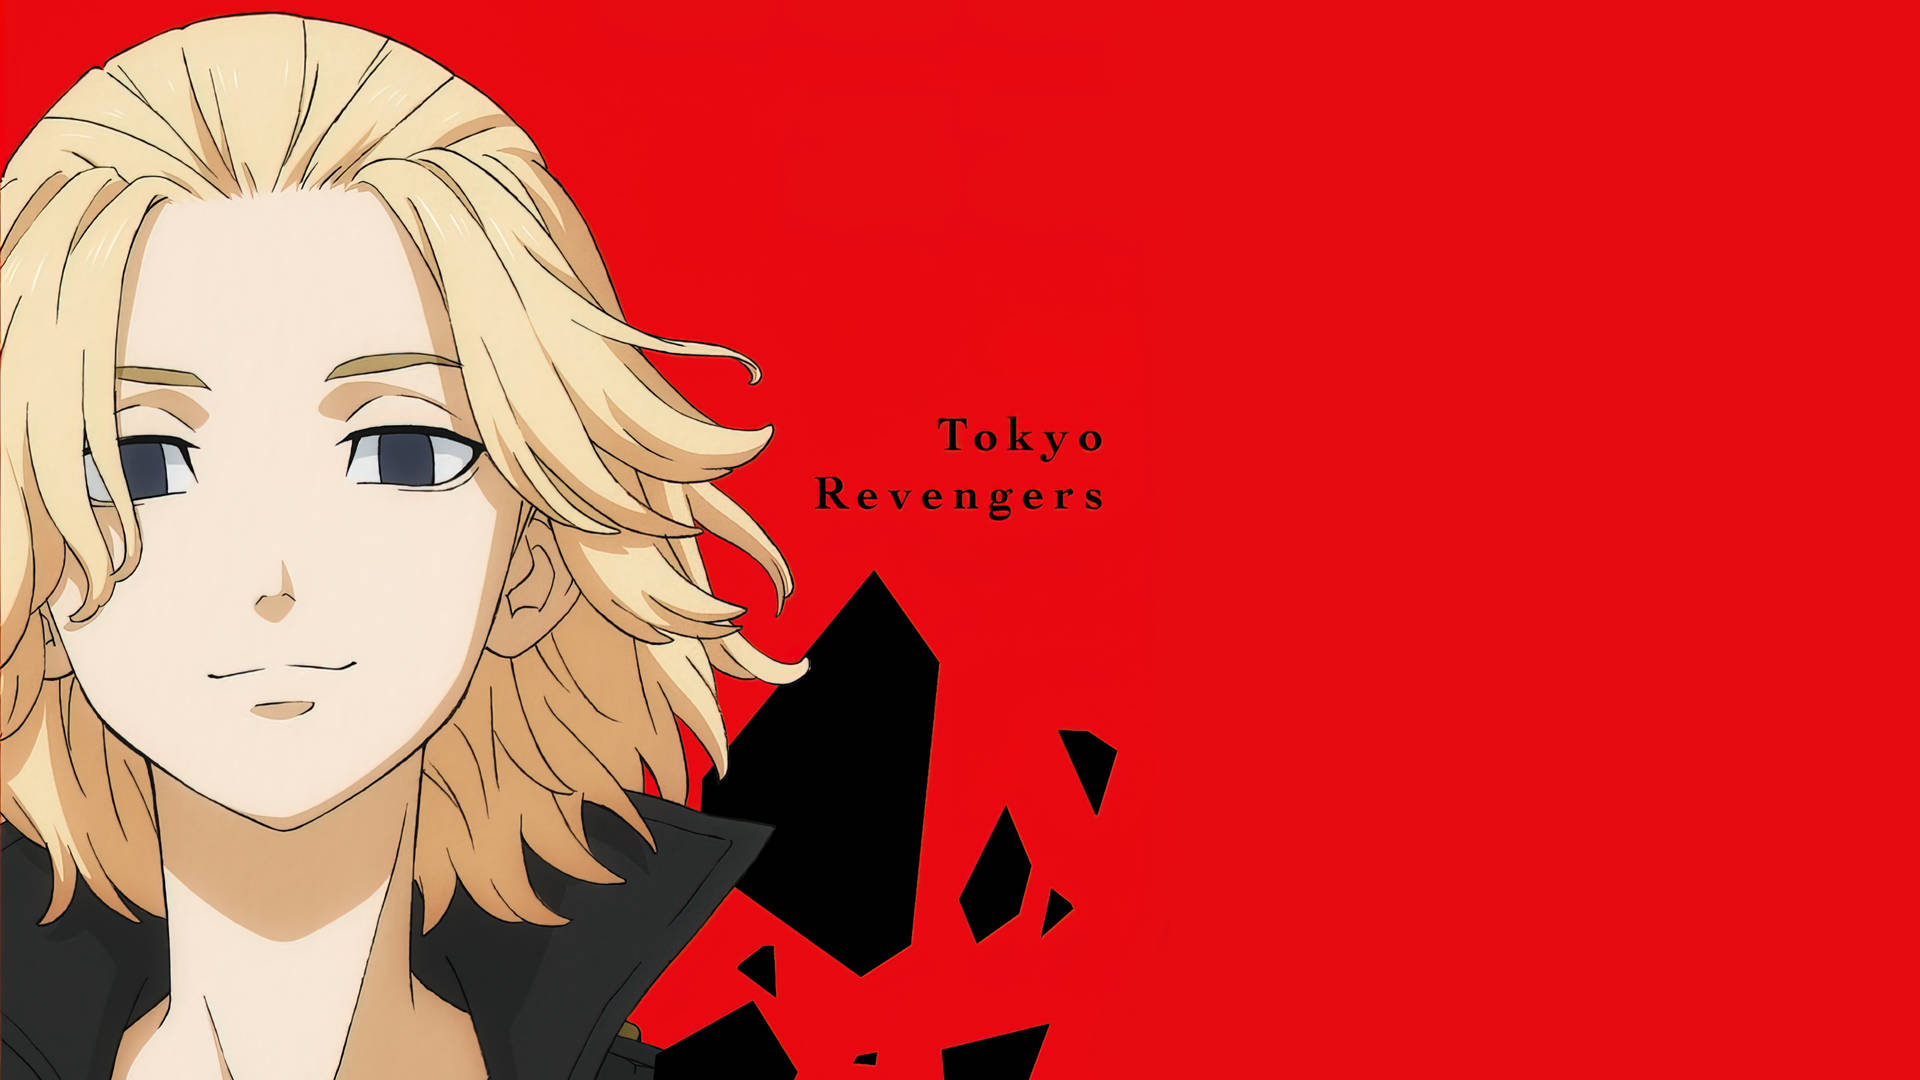 Mikey Tokyo Revengers Red Poster Wallpaper